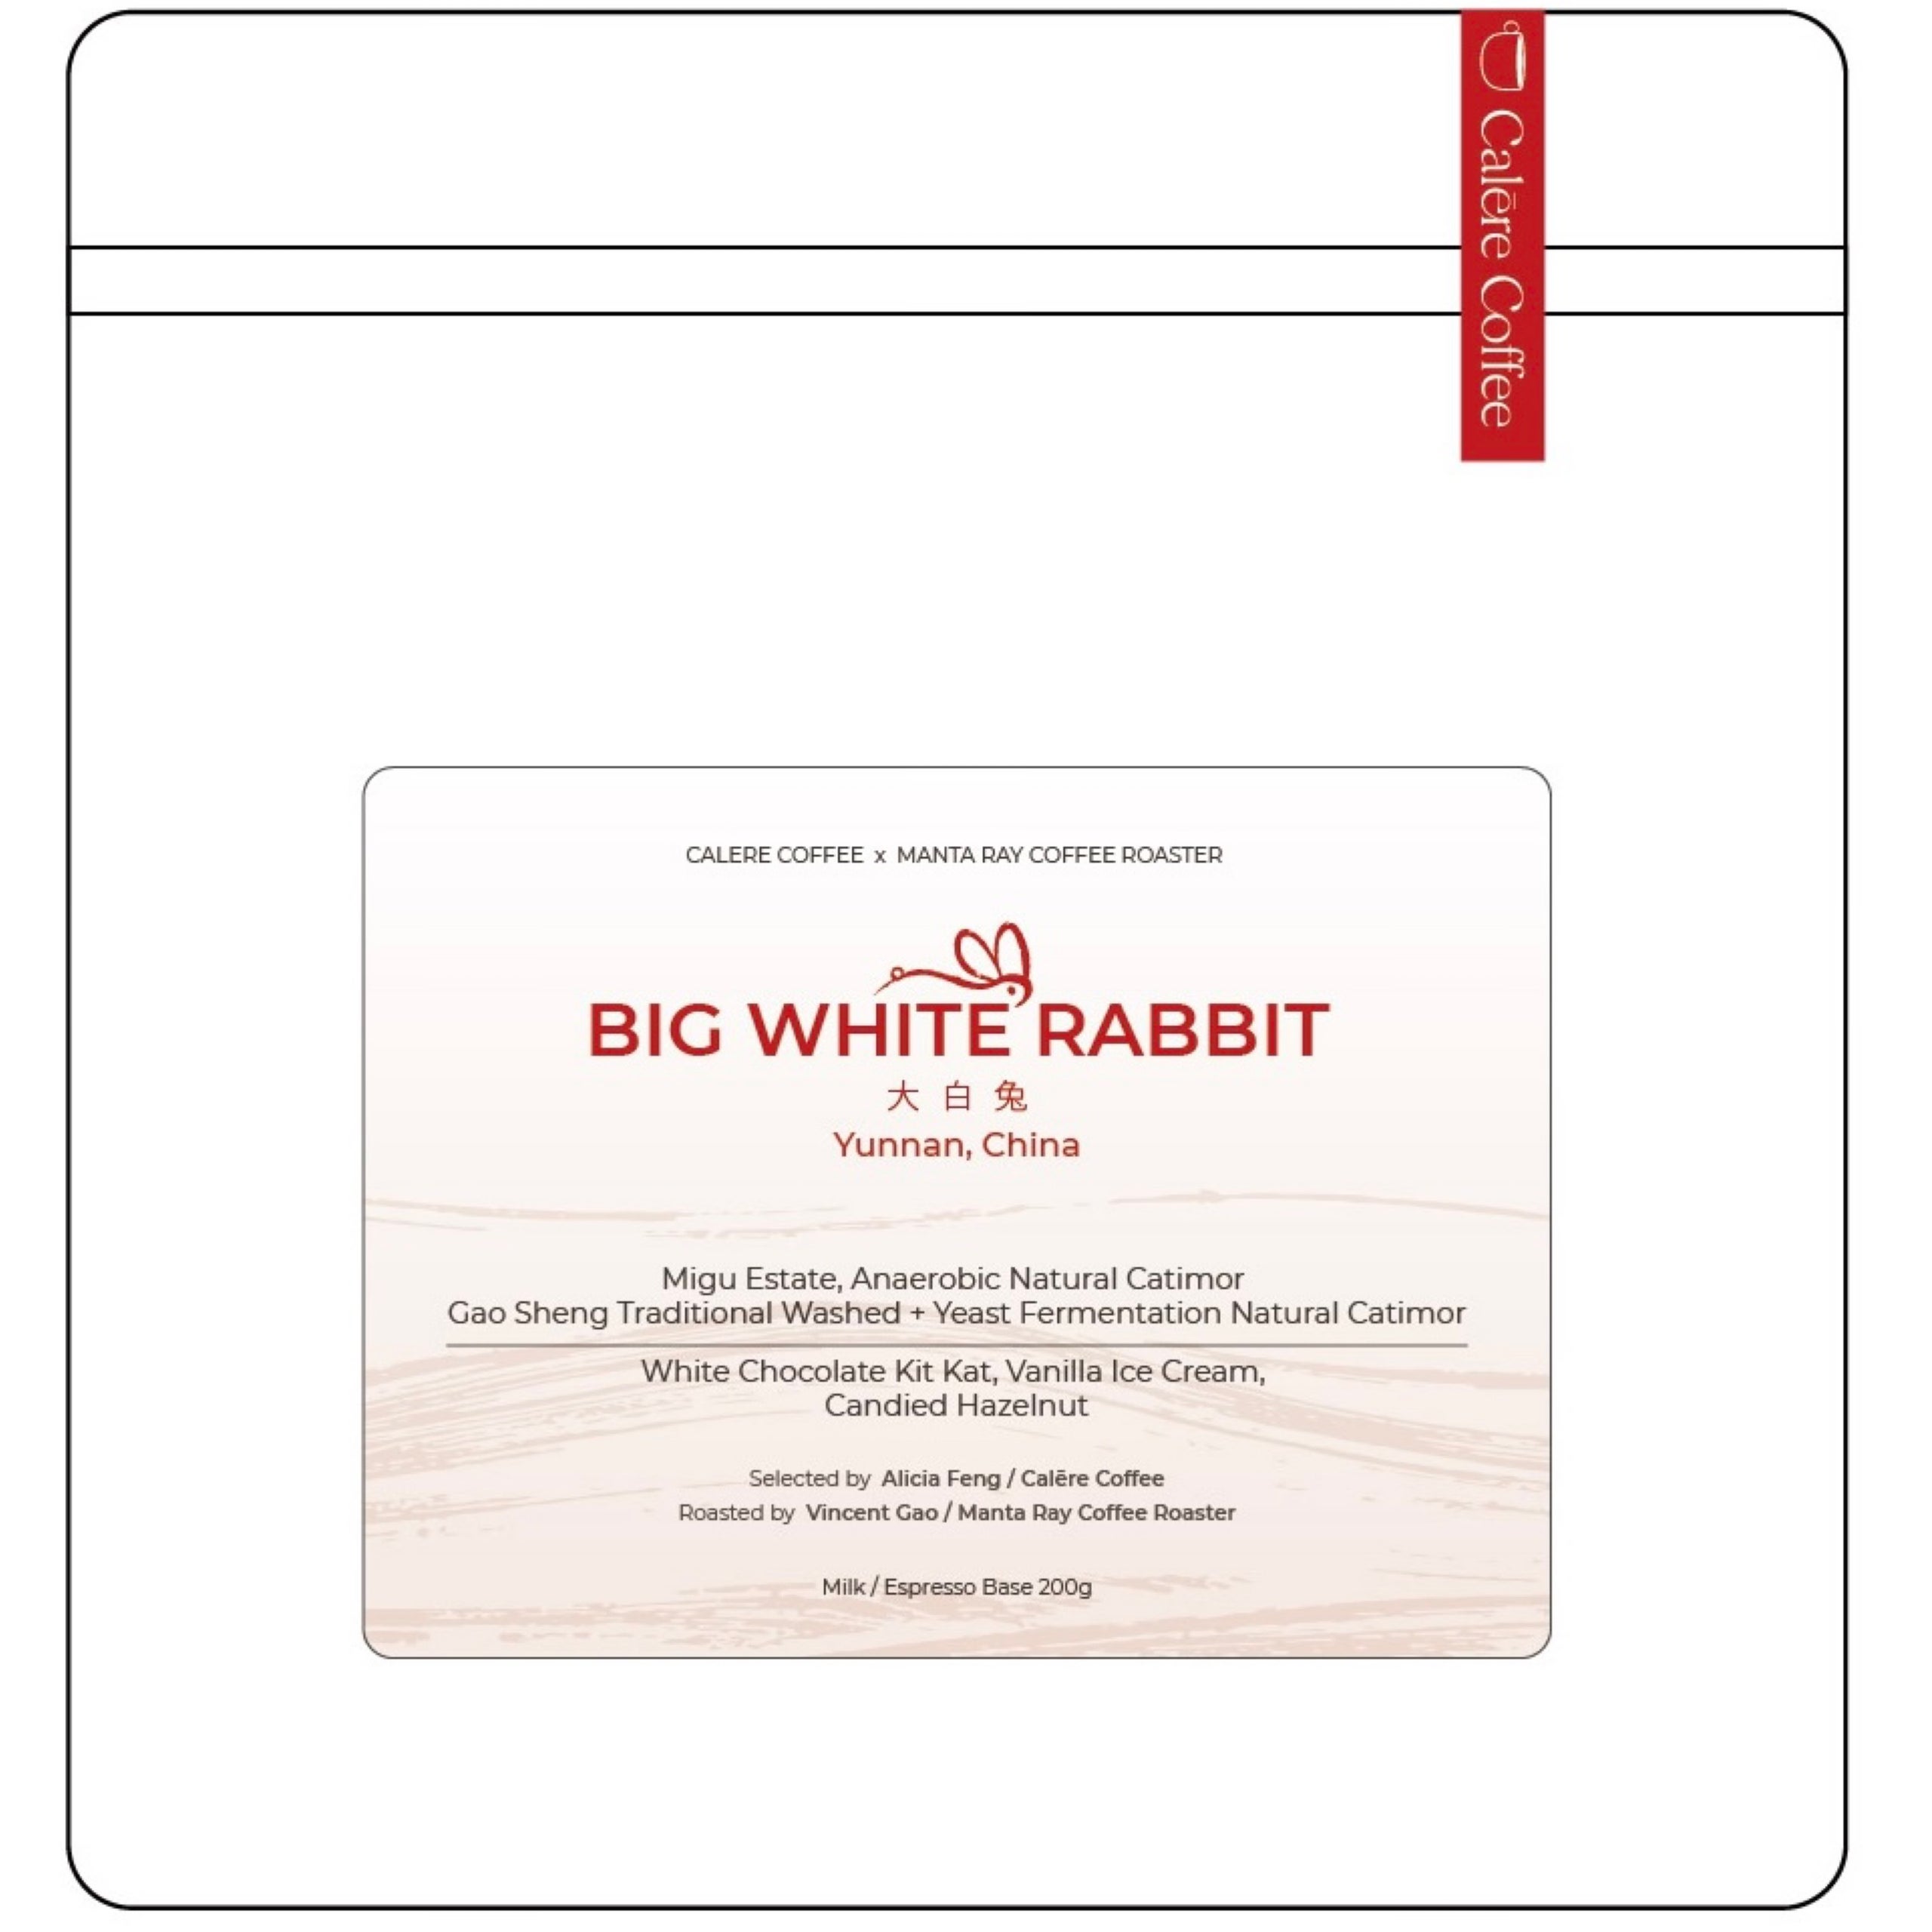 White Rabbit Express on X: HERE COMES A NEW KIT KAT FLAVOR